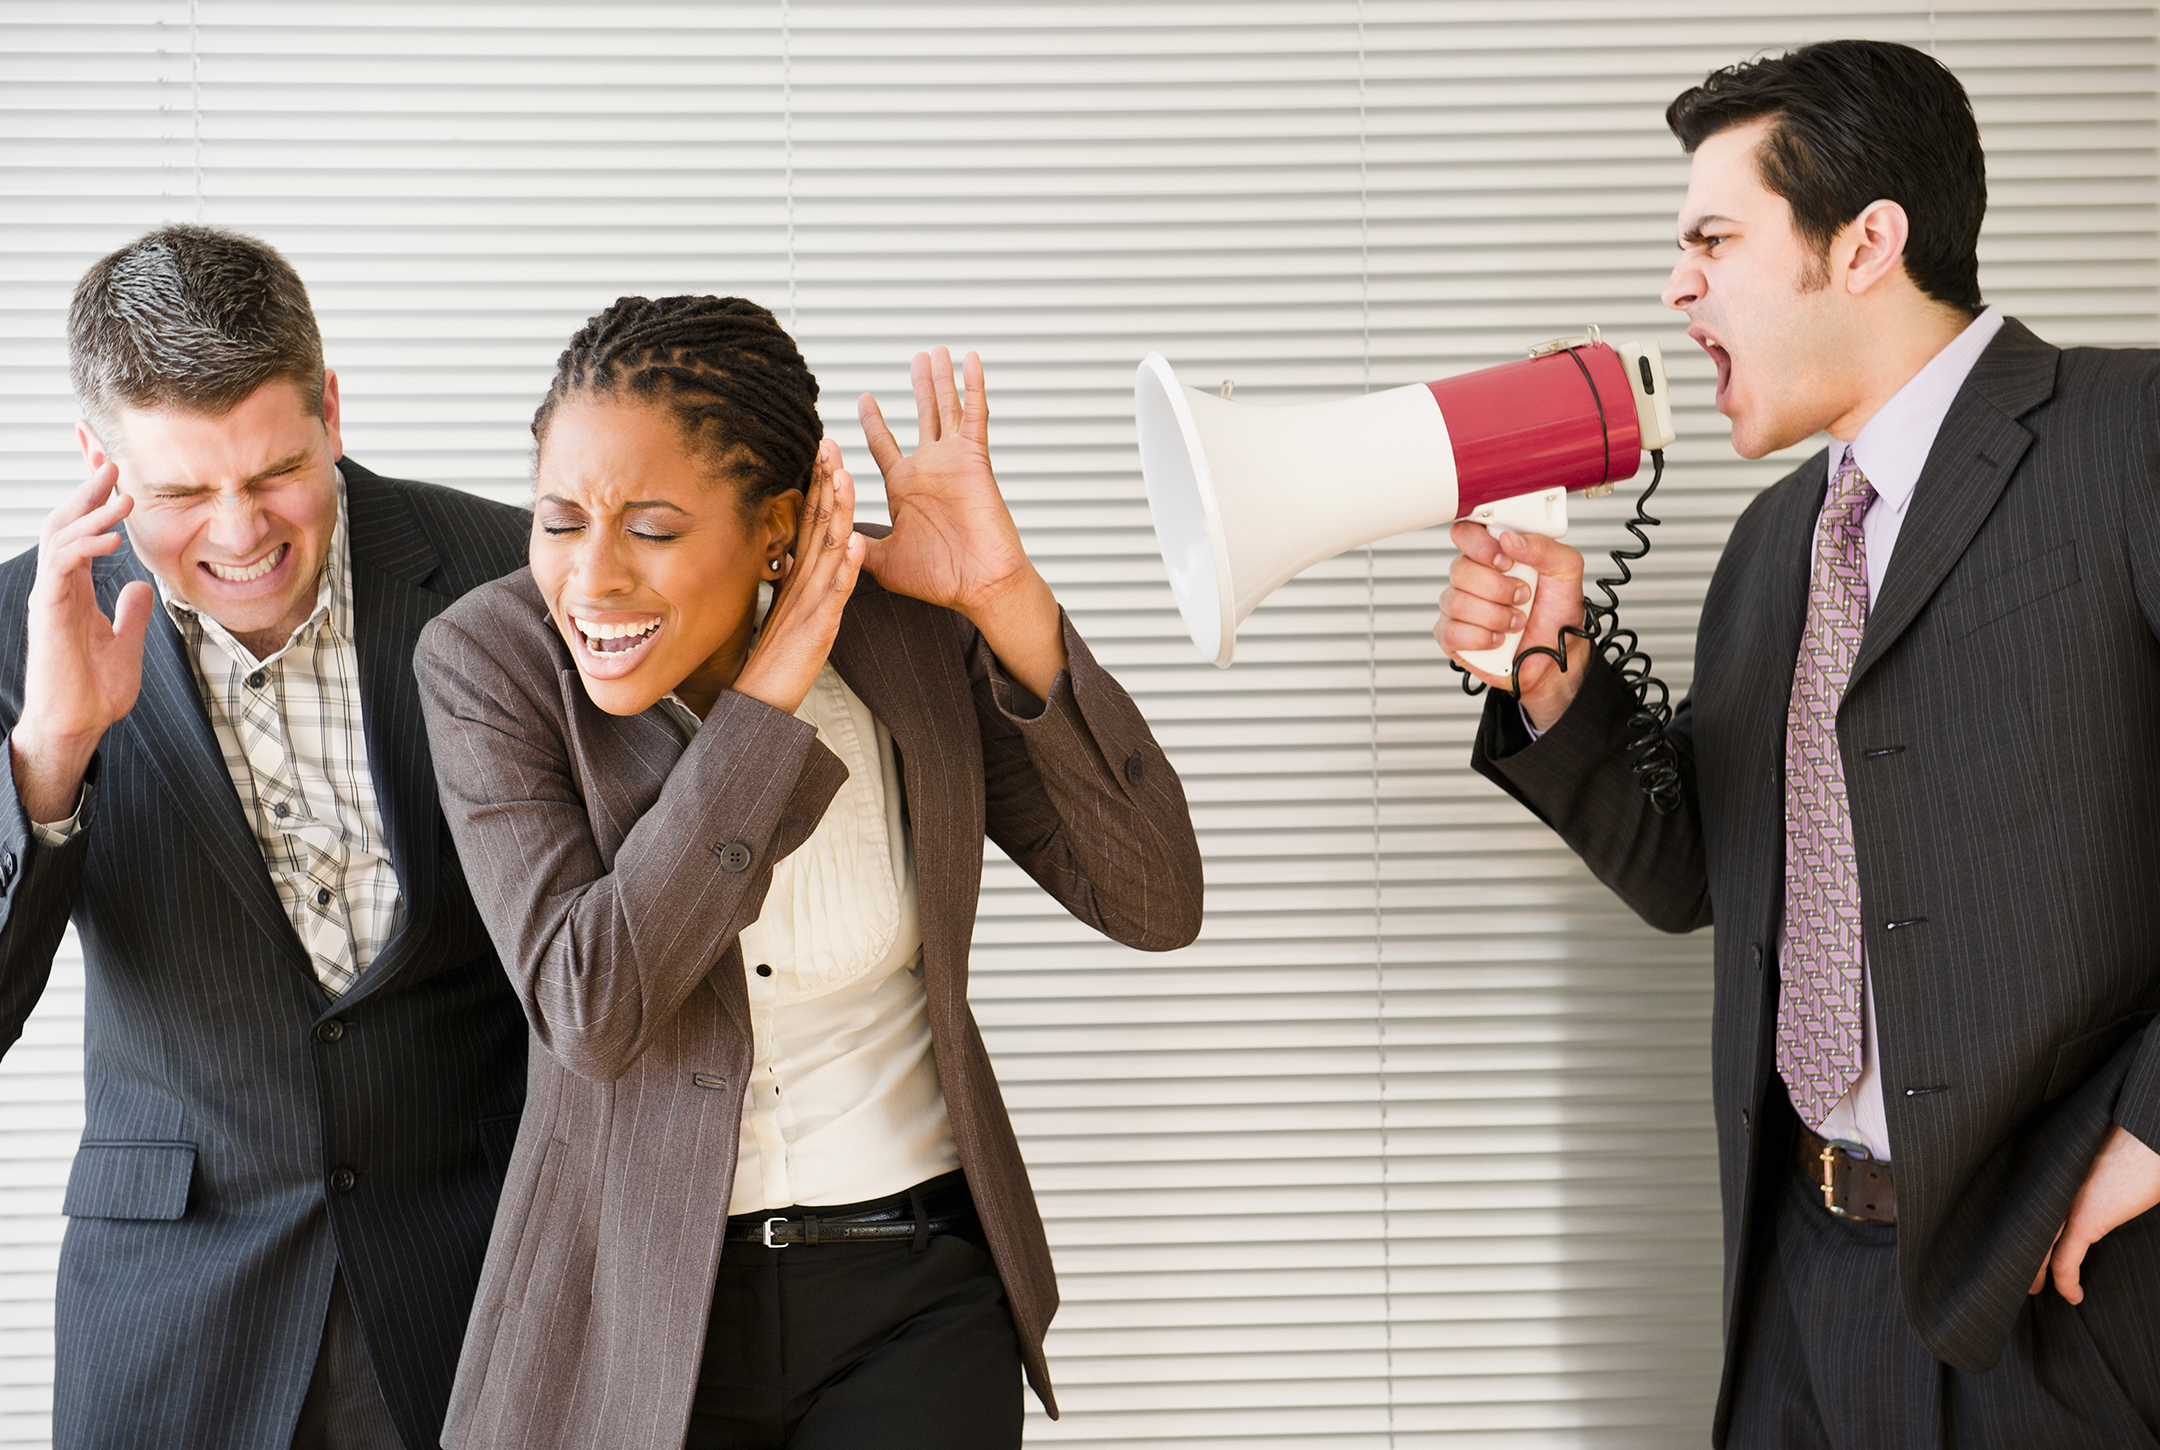 Businessman shouting through bullhorn at co-workers